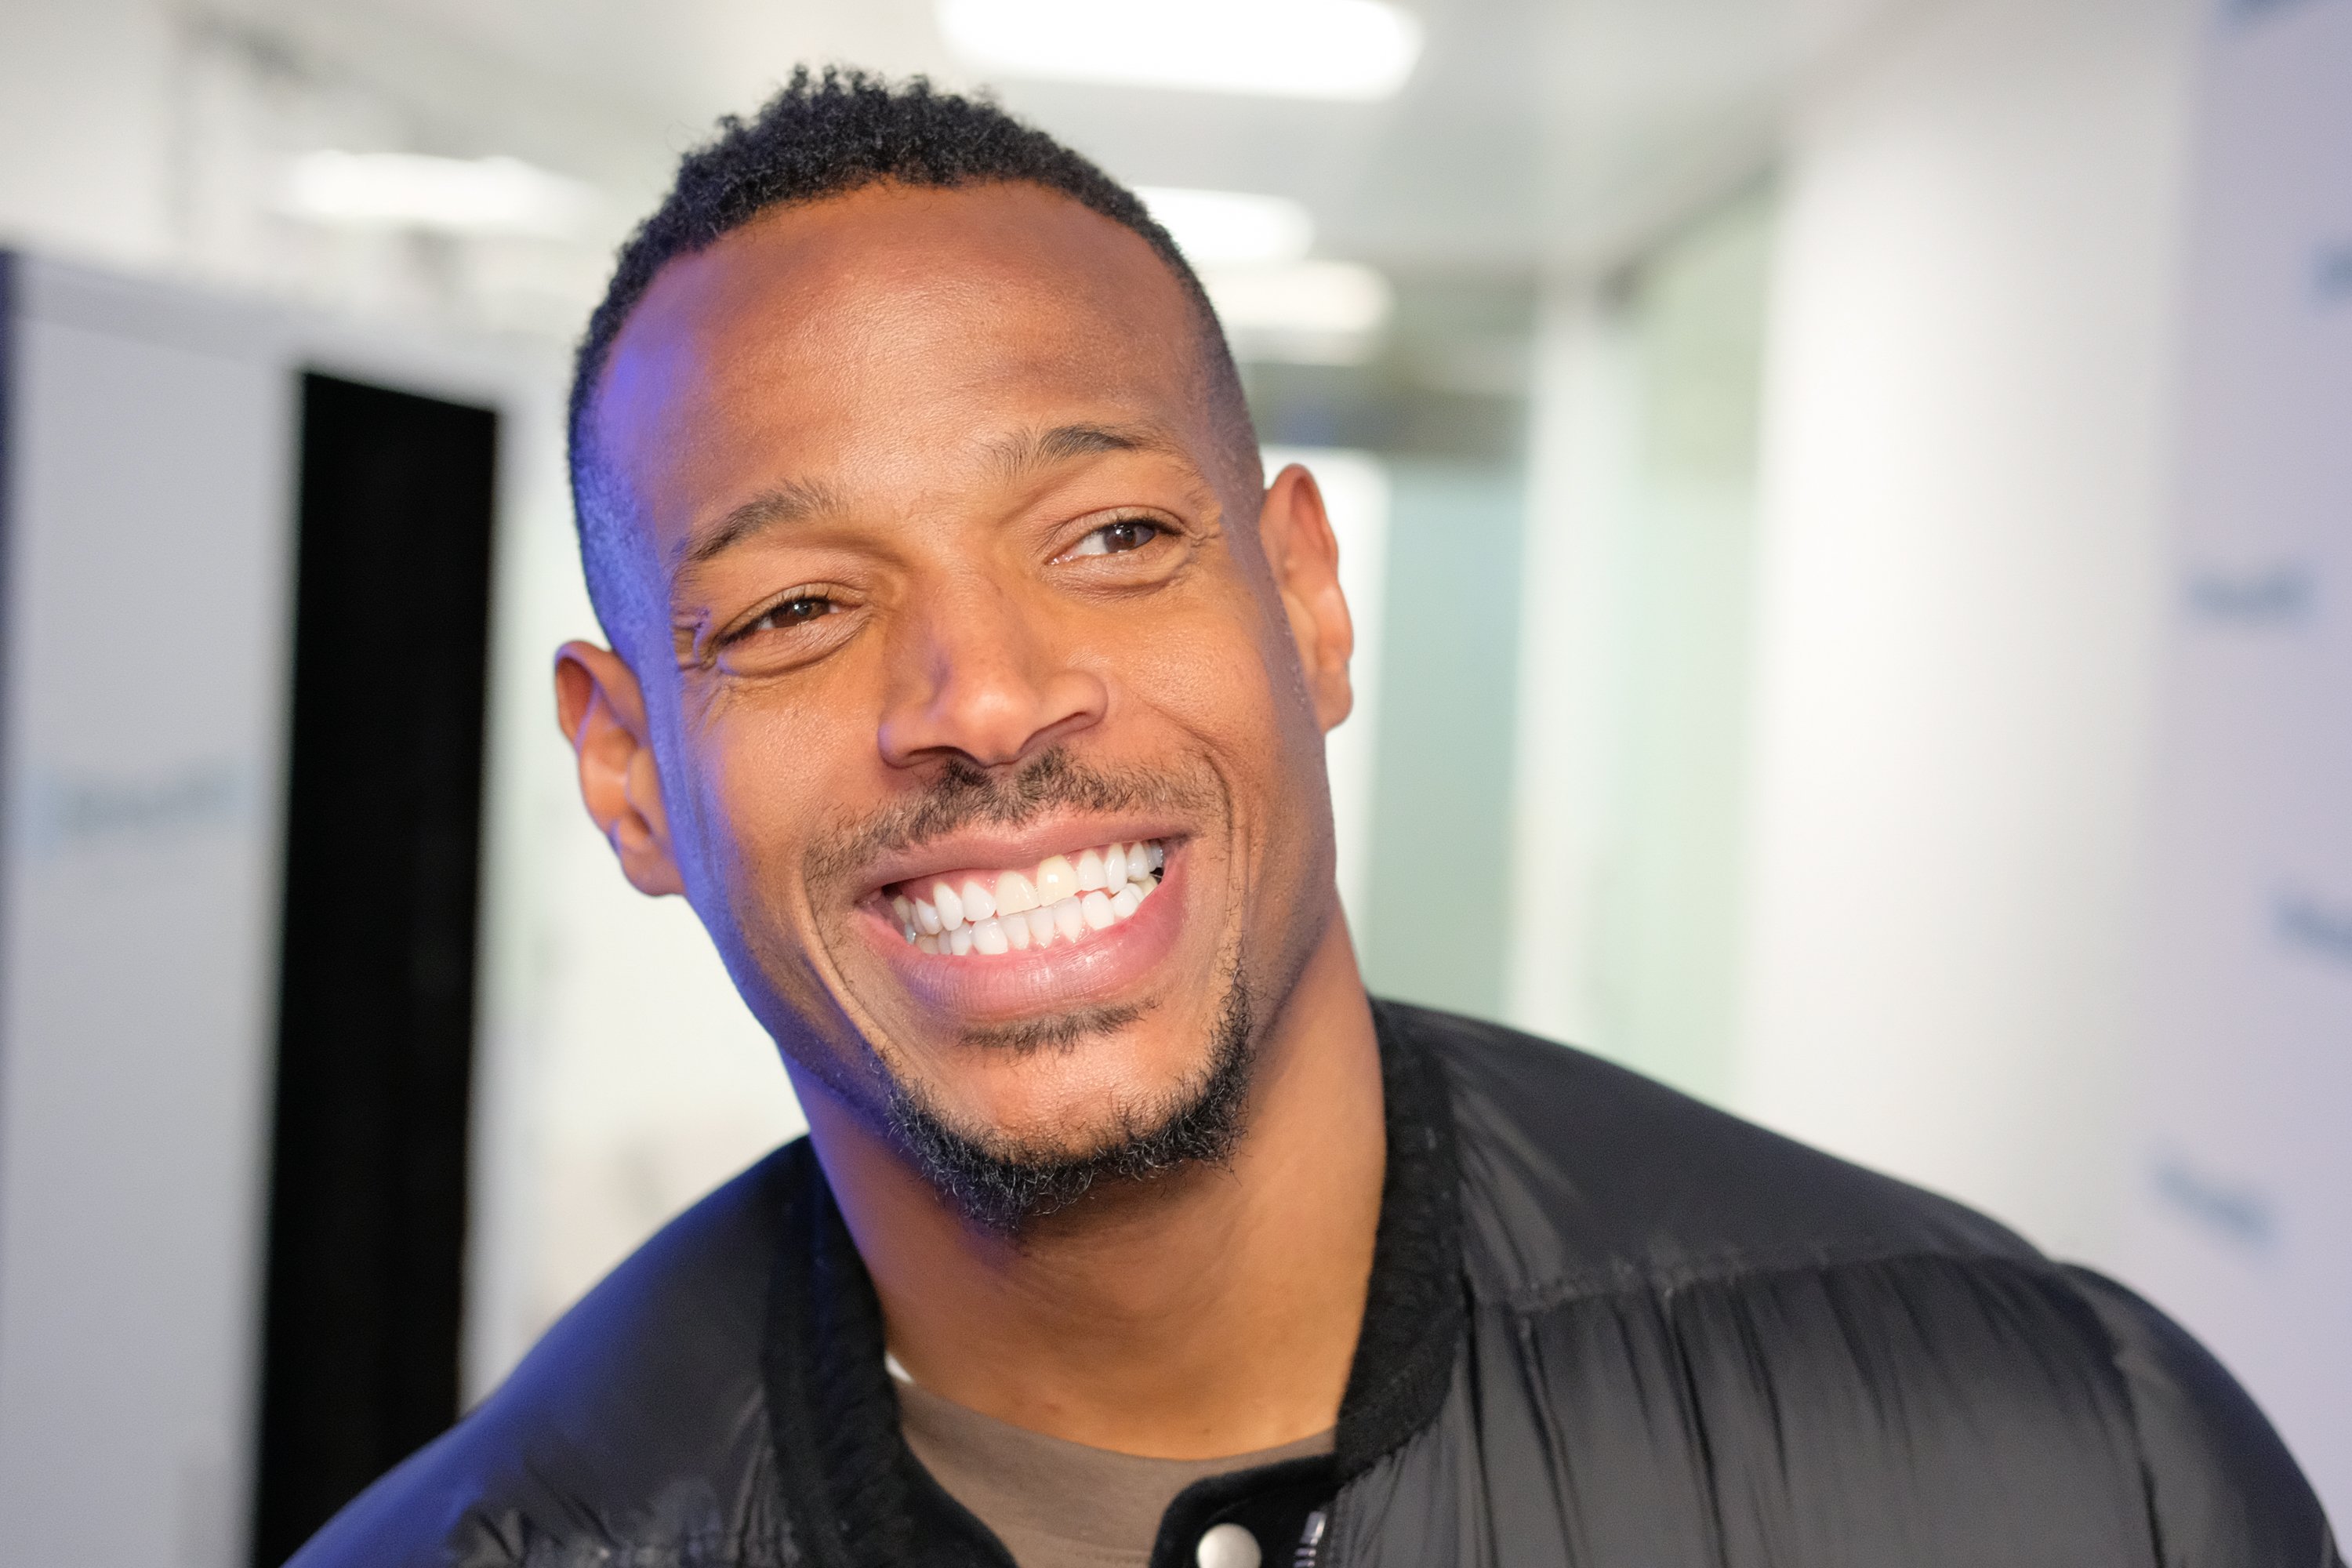 Marlon Wayans at the SiriusXM Studios on March 2, 2018 in New York City. | Source: Getty Images